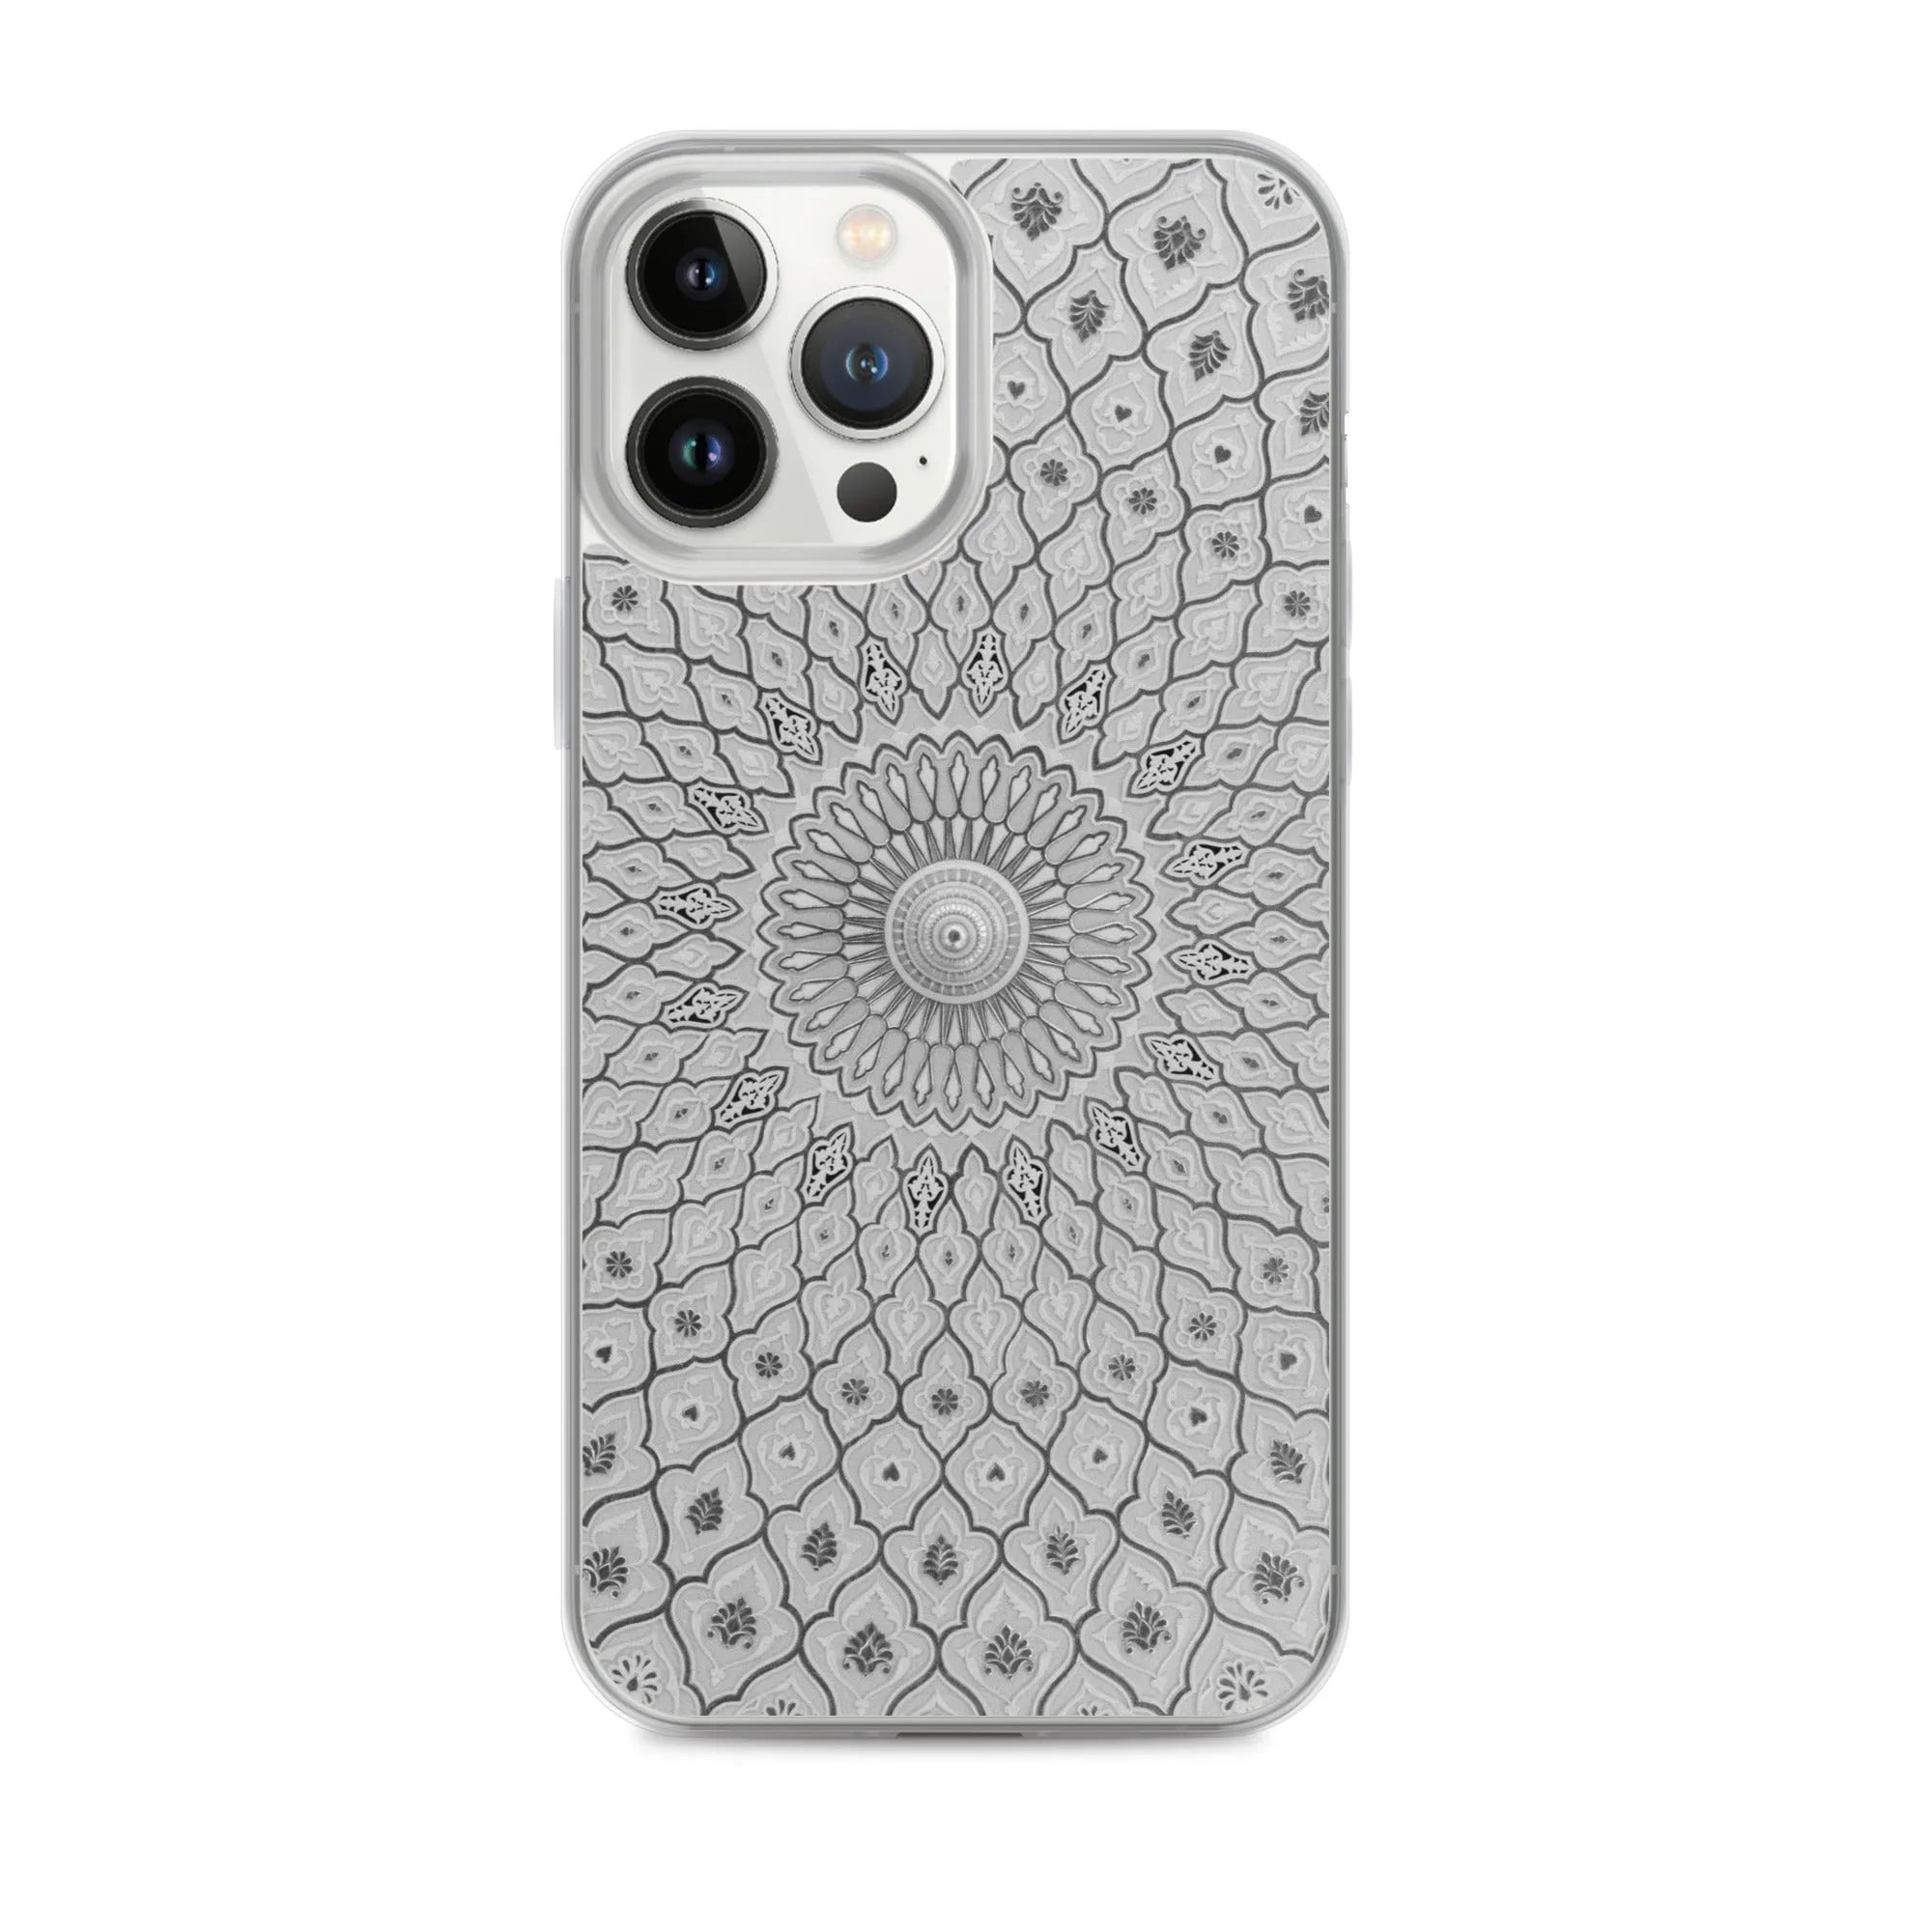 Divine Order - Designer Travels Art Iphone Case - Black And White - Iphone 13 Pro Max - Mobile Phone Cases - Aesthetic